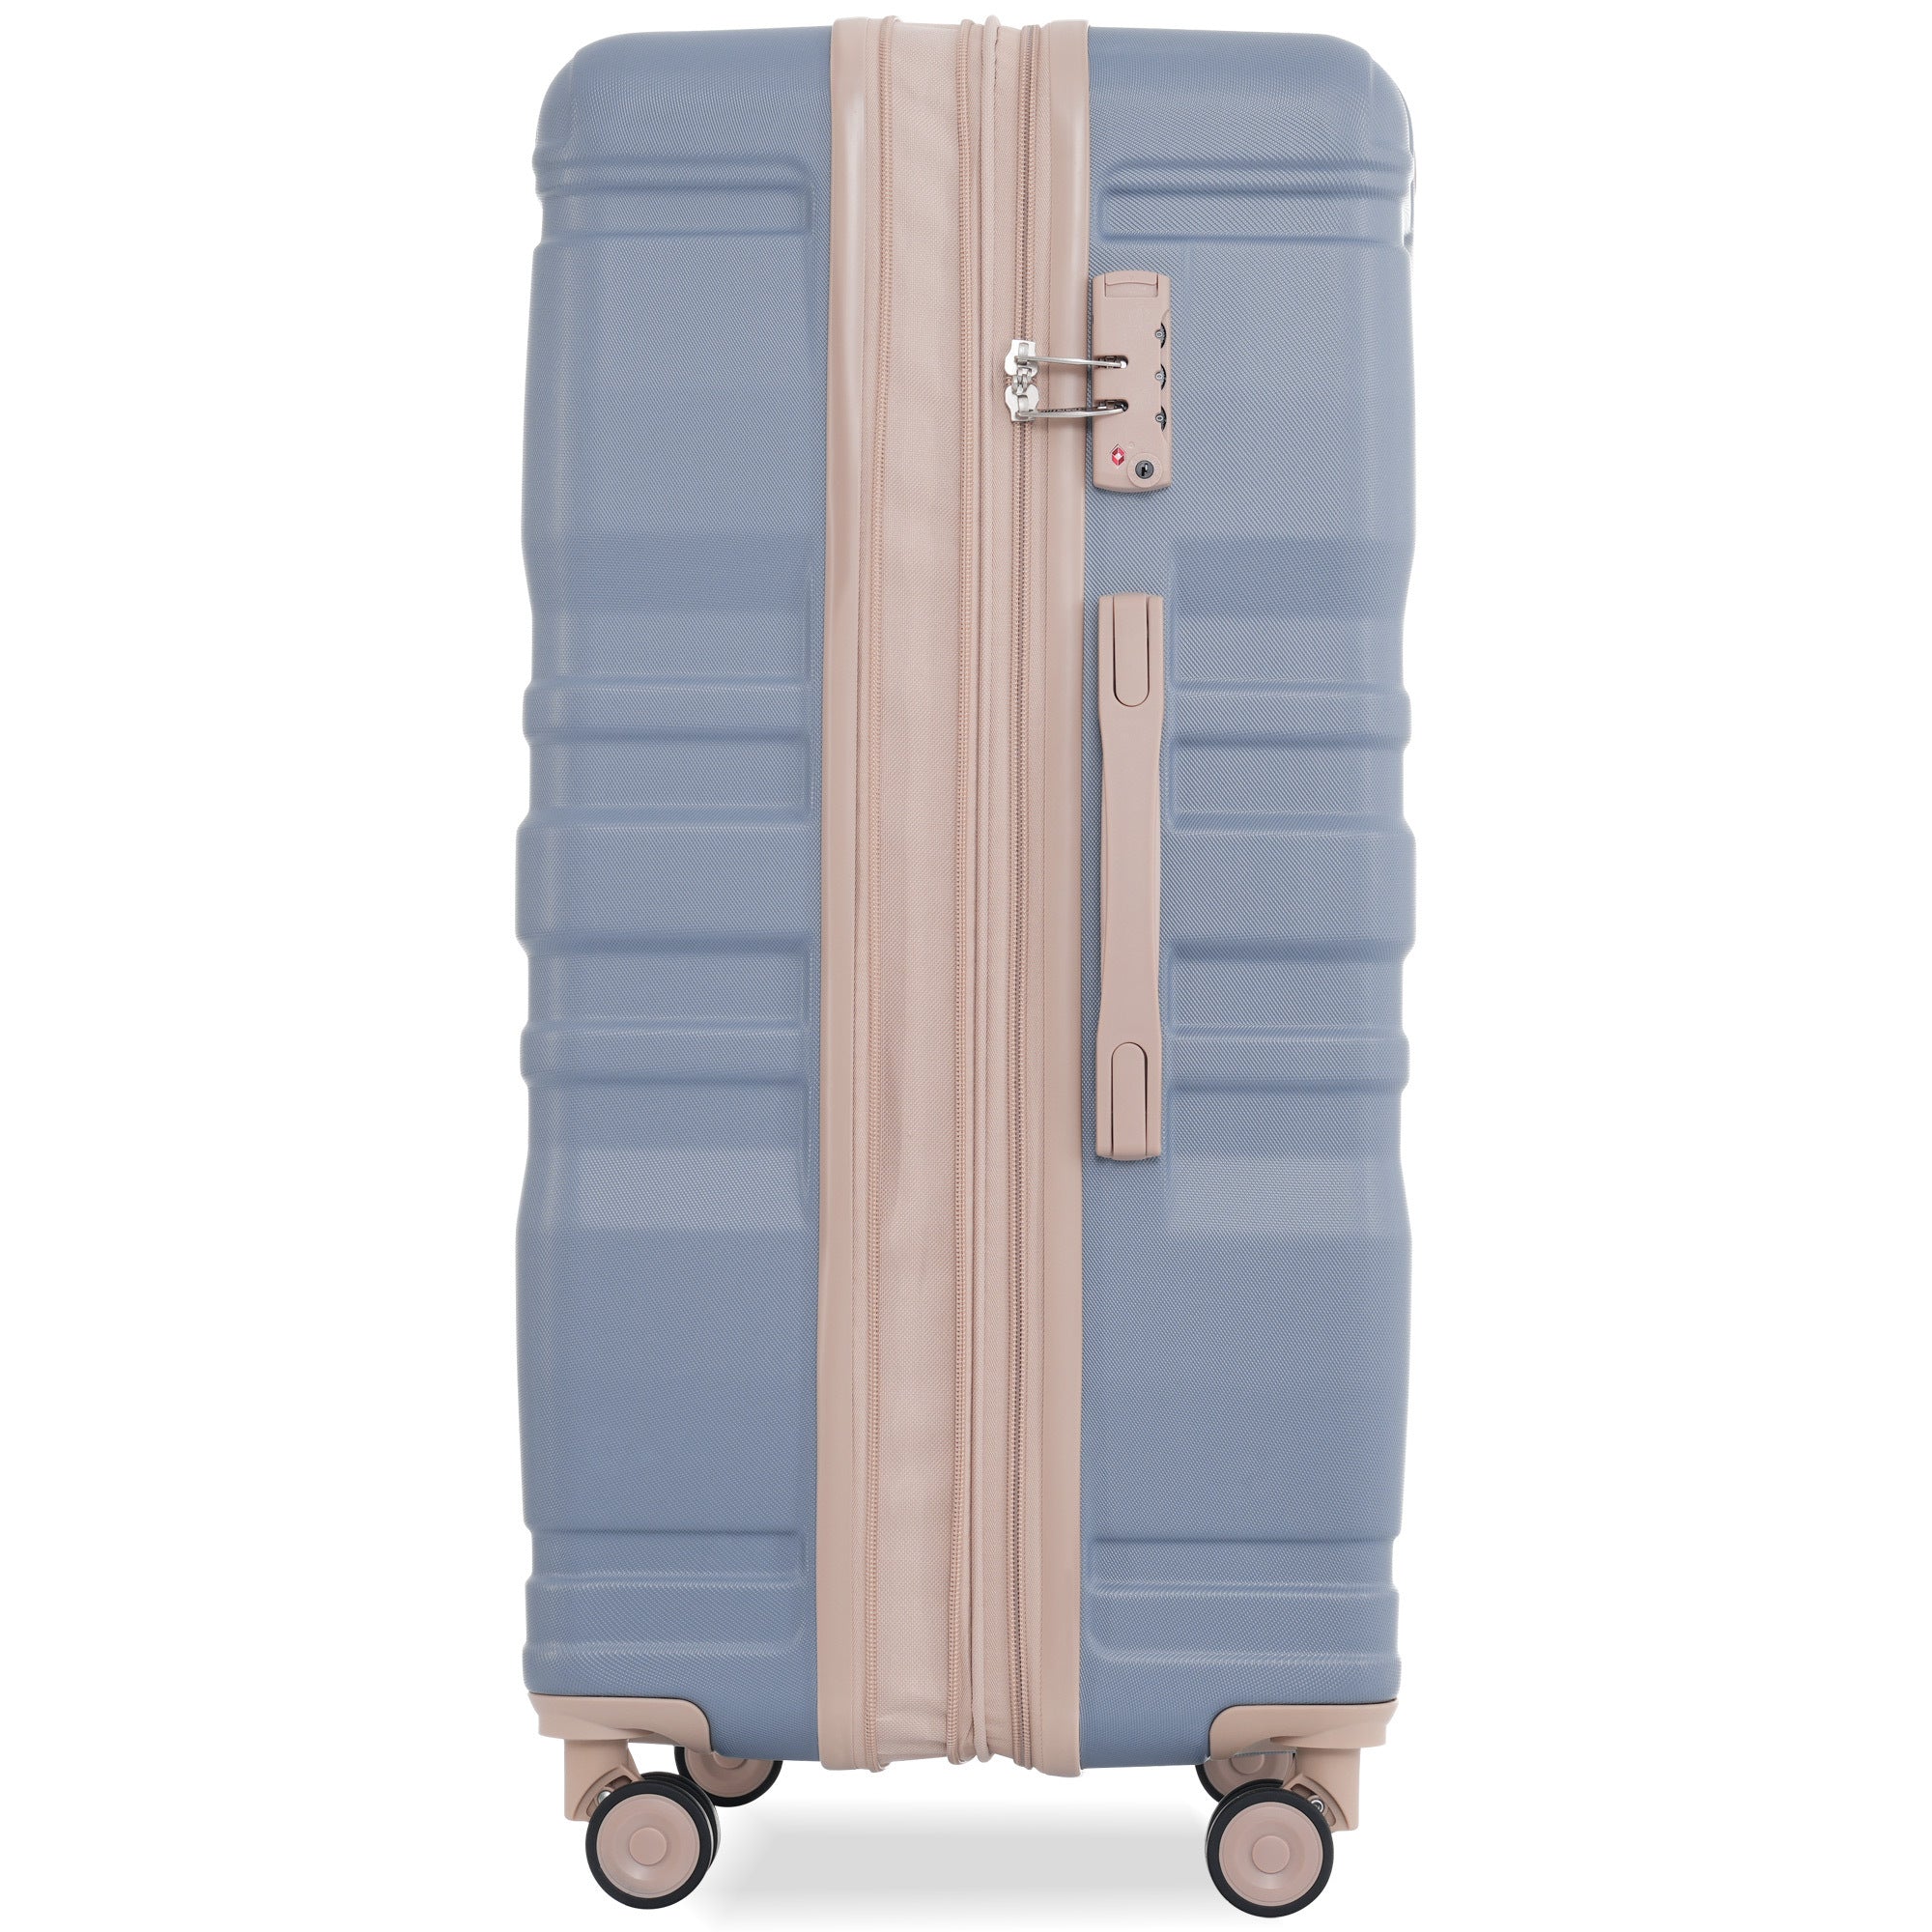 Luggage Sets 4 Piece, Expandable ABS Durable Suitcase blue-abs